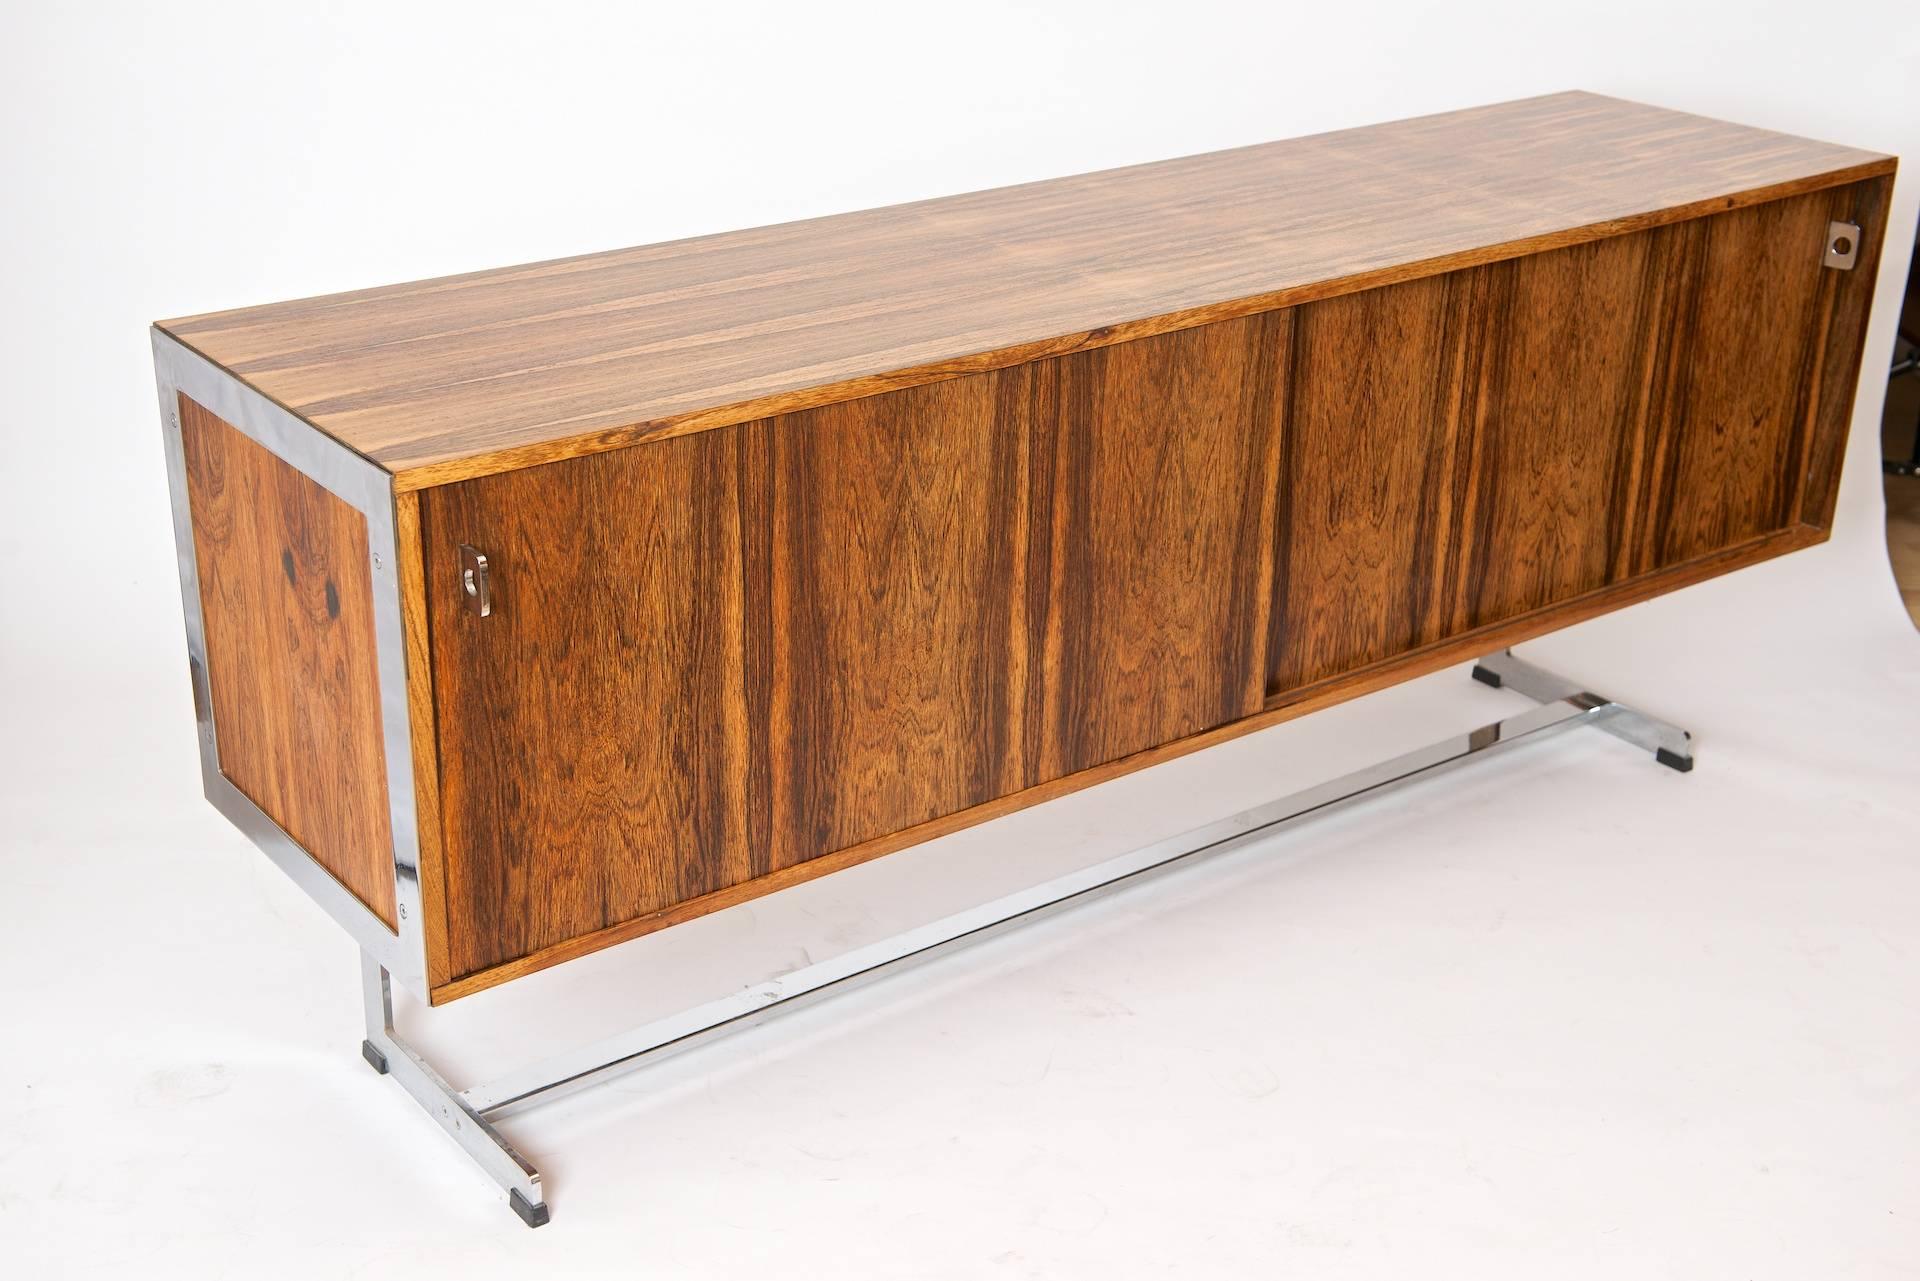 Richard Young for Merrow Associates sideboard.

Rosewood and chrome.

There is a glass top with this sideboard that is not pictured. It is in excellent condition